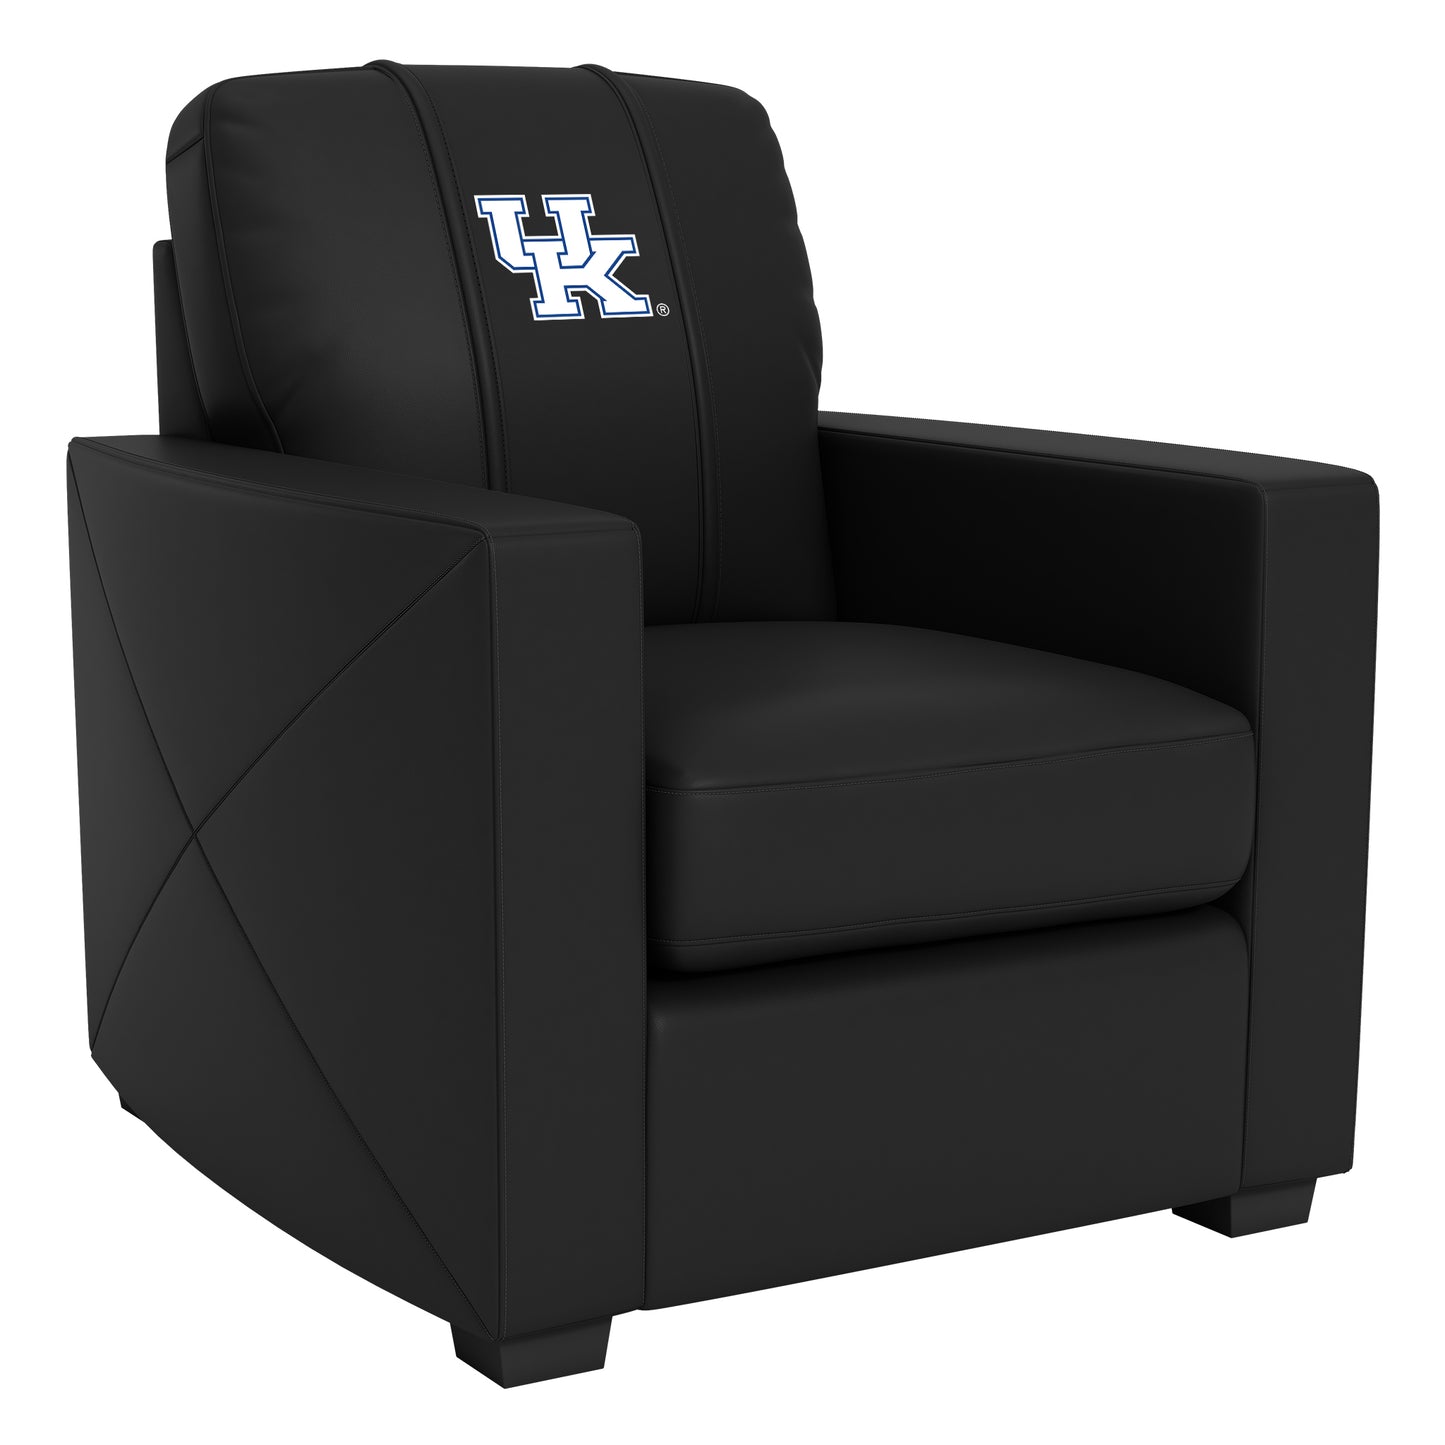 Silver Club Chair with Kentucky Wildcats Logo